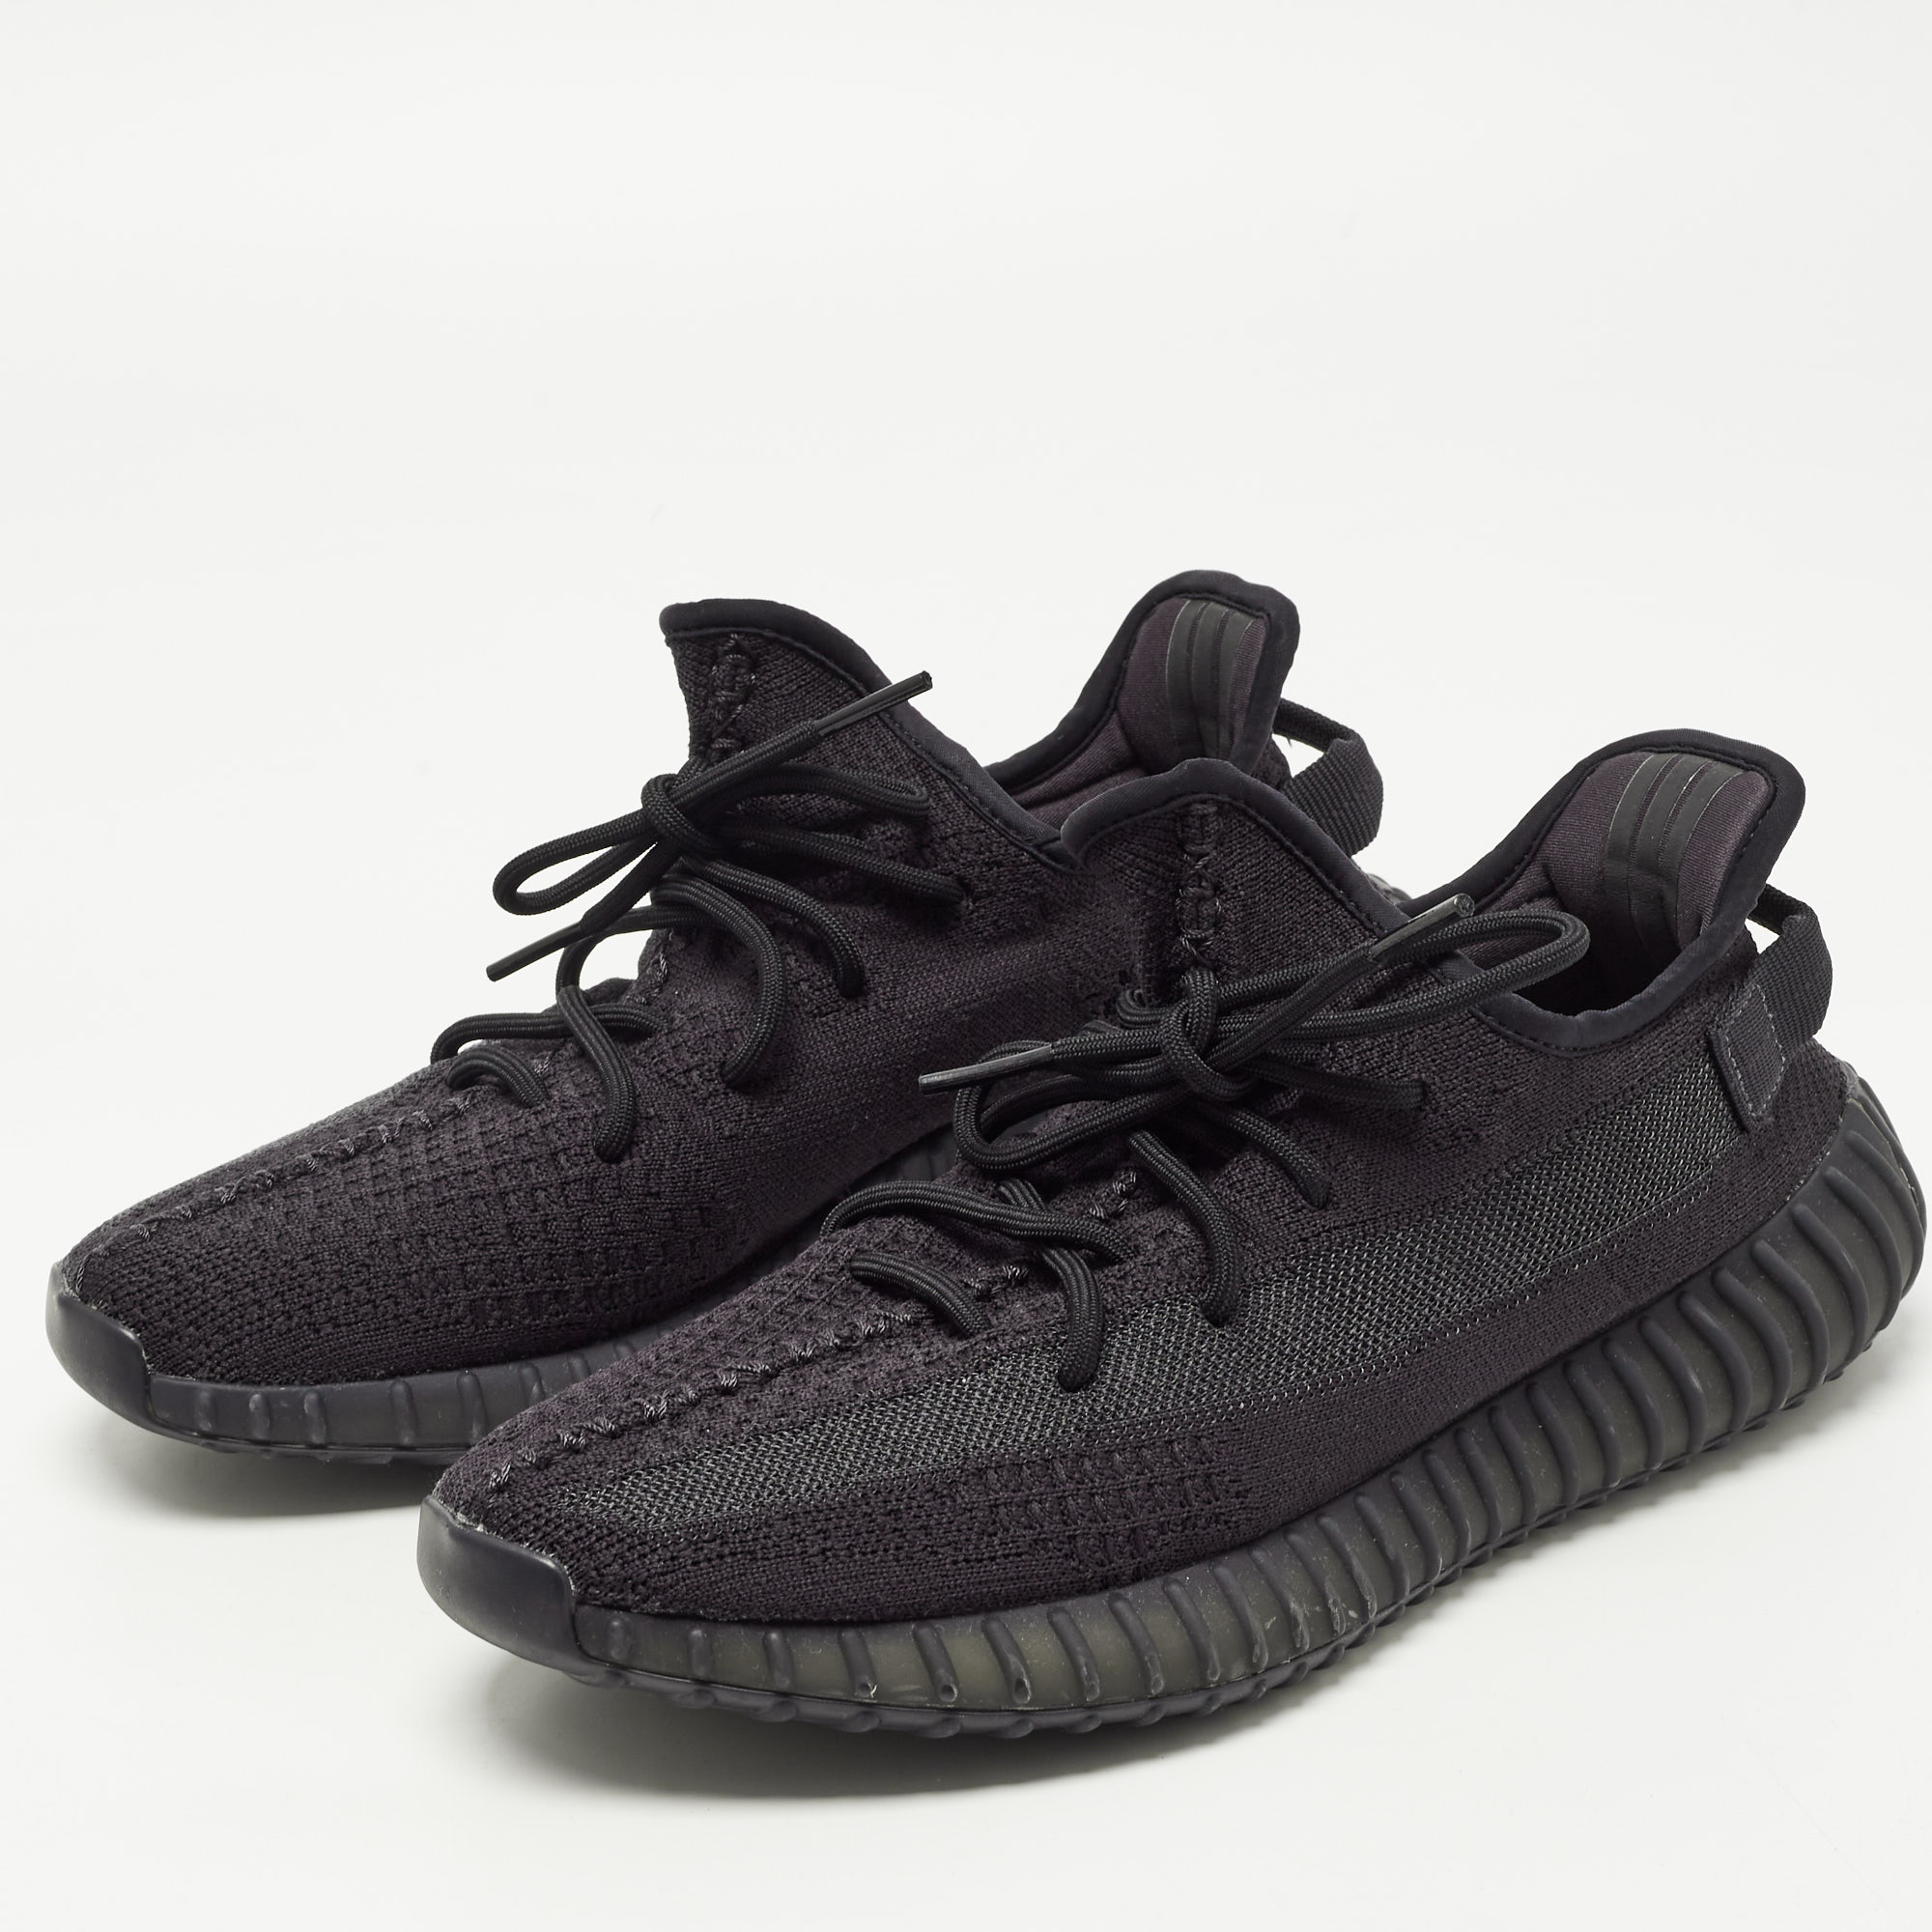 

adidas Yeezy Black Knit Fabric Boost 350 V2 Onyx Sneakers Size 44 2/3